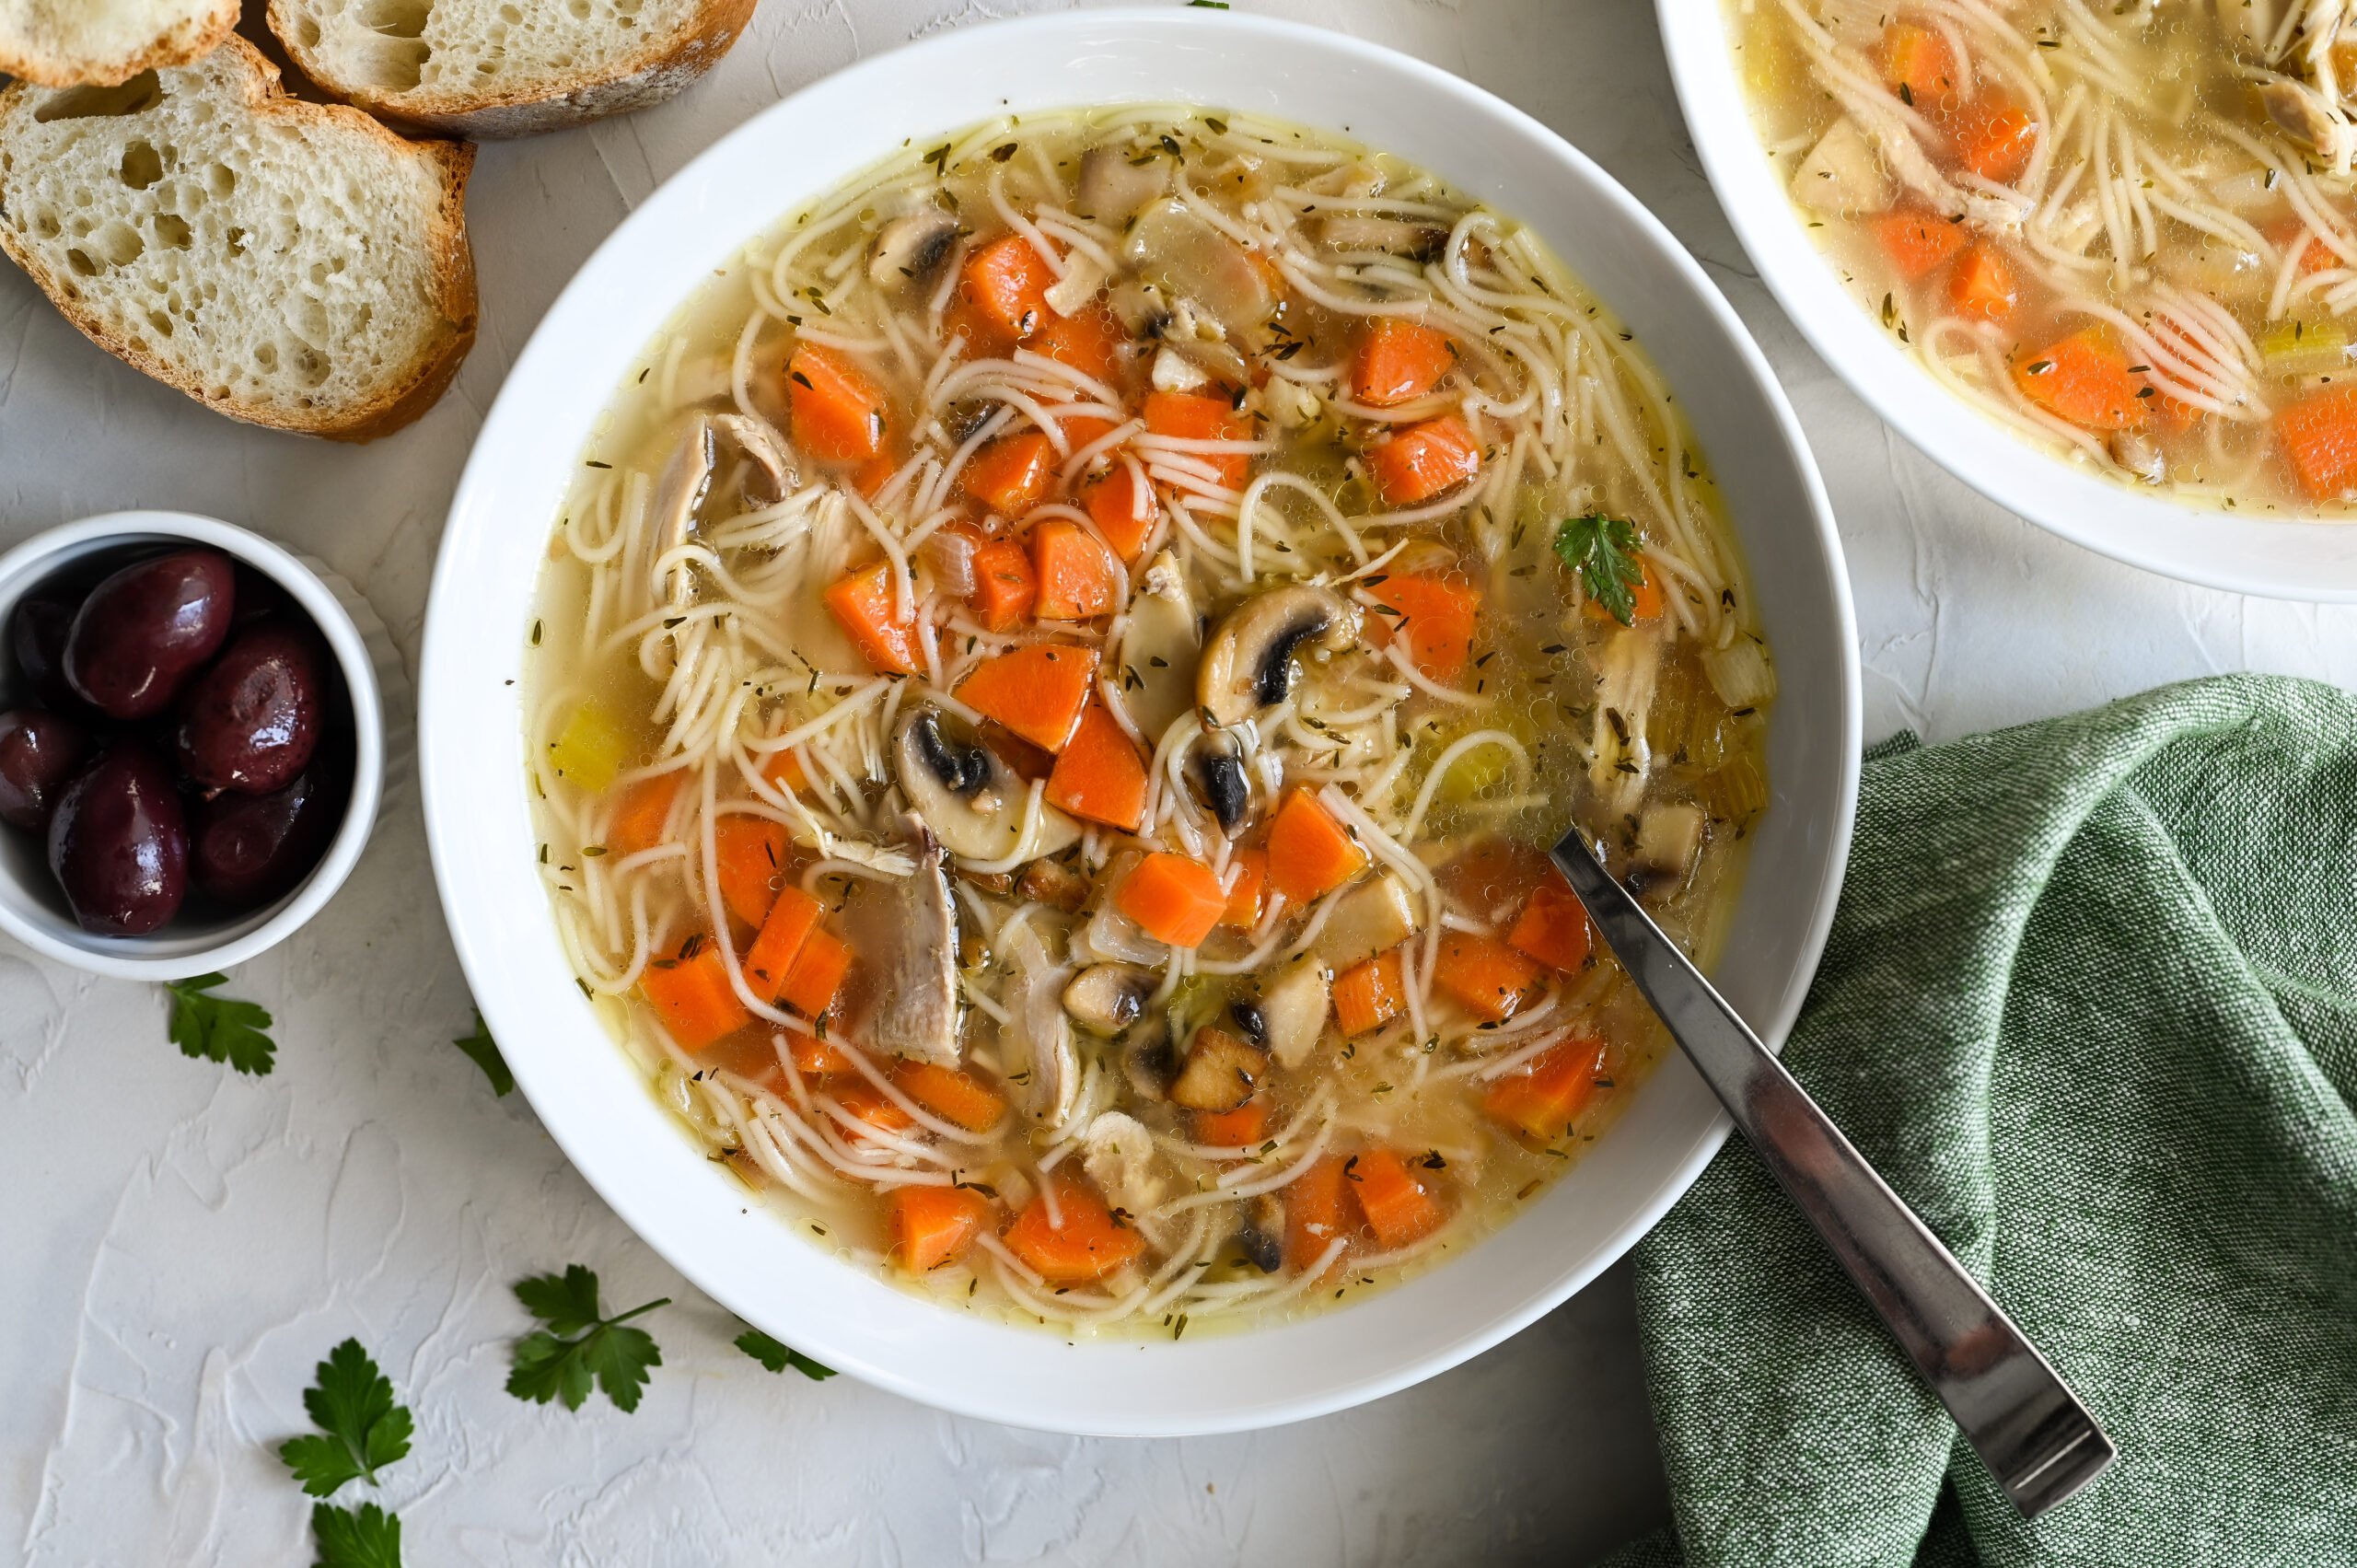 Easy chicken noodle soup